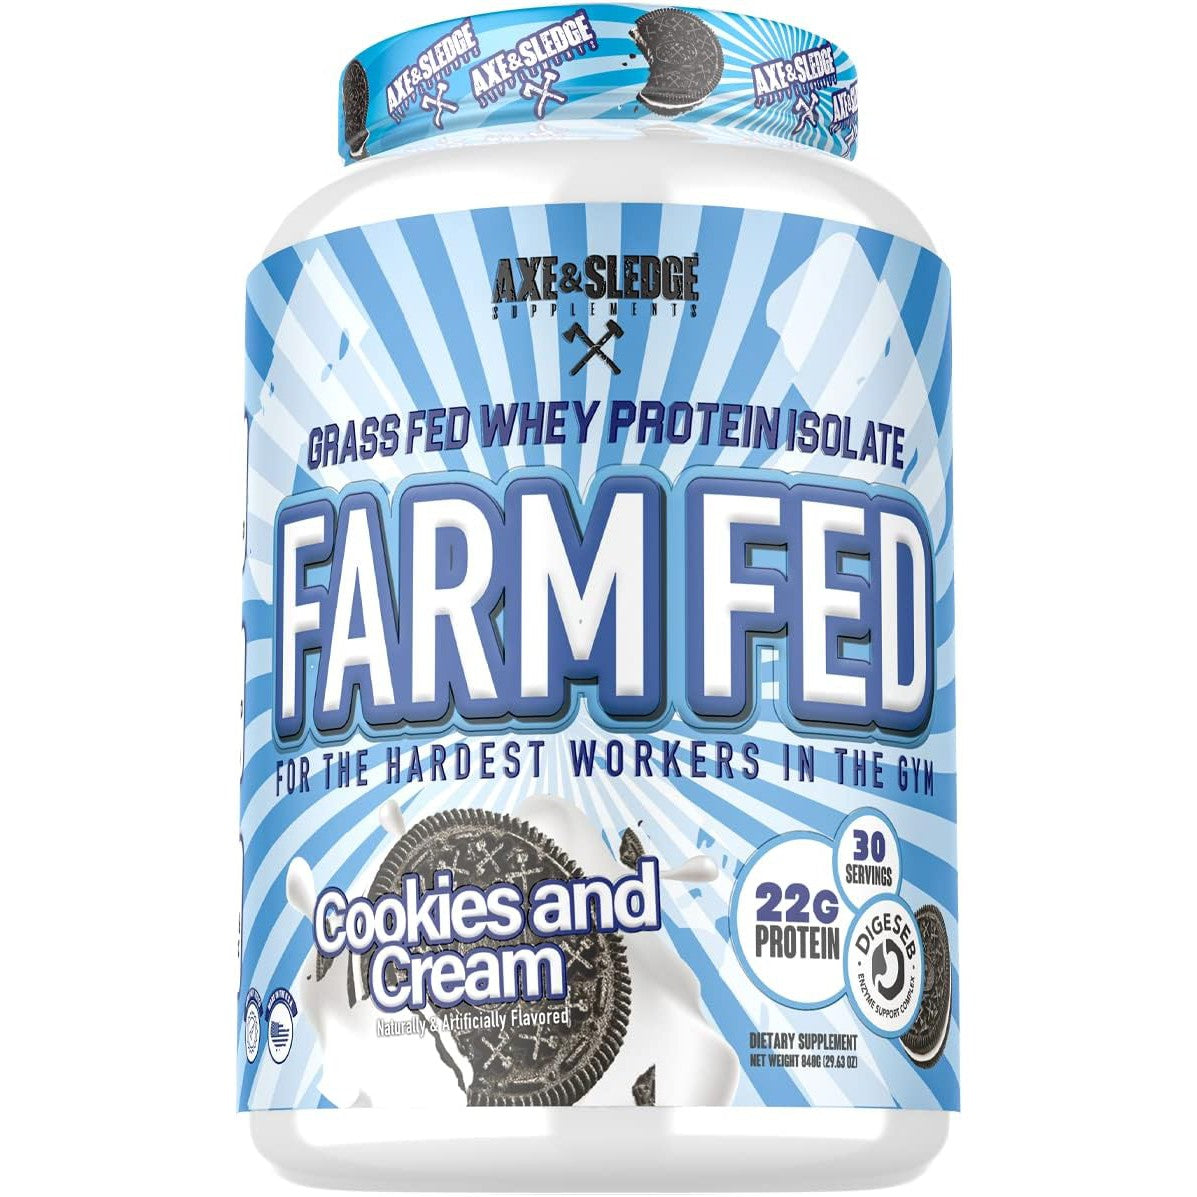 Axe & Sledge Supplements Farm Fed Grass-Fed Whey Protein Isolate with Digestive Enzymes, 22 Grams Protein, 840g 30 Servings - Cookies and Cream